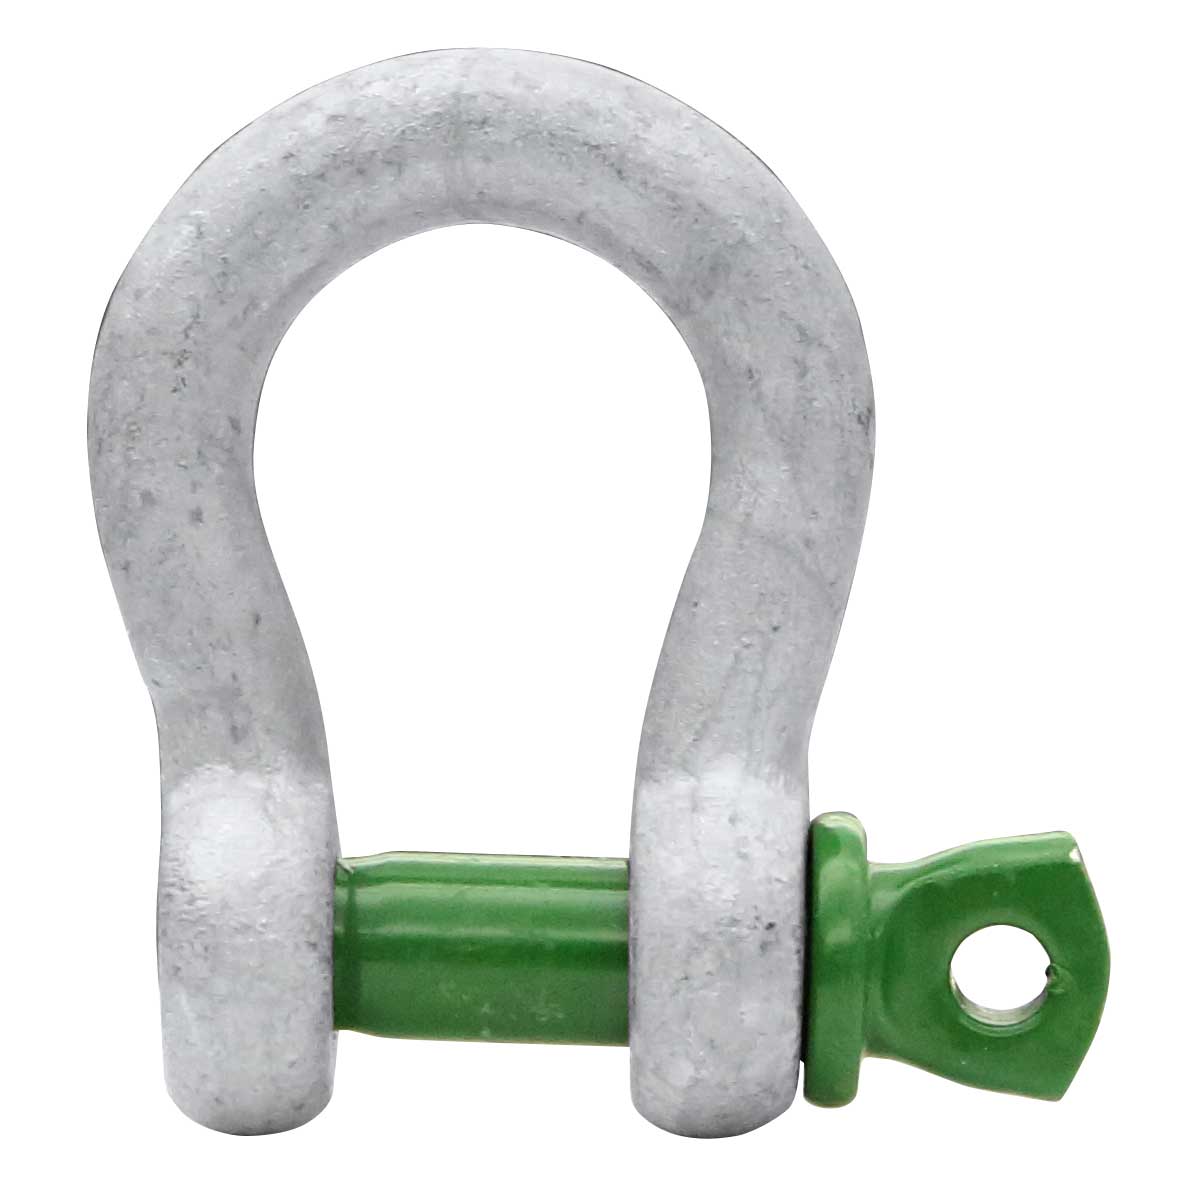 7/8" Van Beest Green Pin® Screw Pin Anchor Shackle | G-4161 - 6.5 Ton primary image